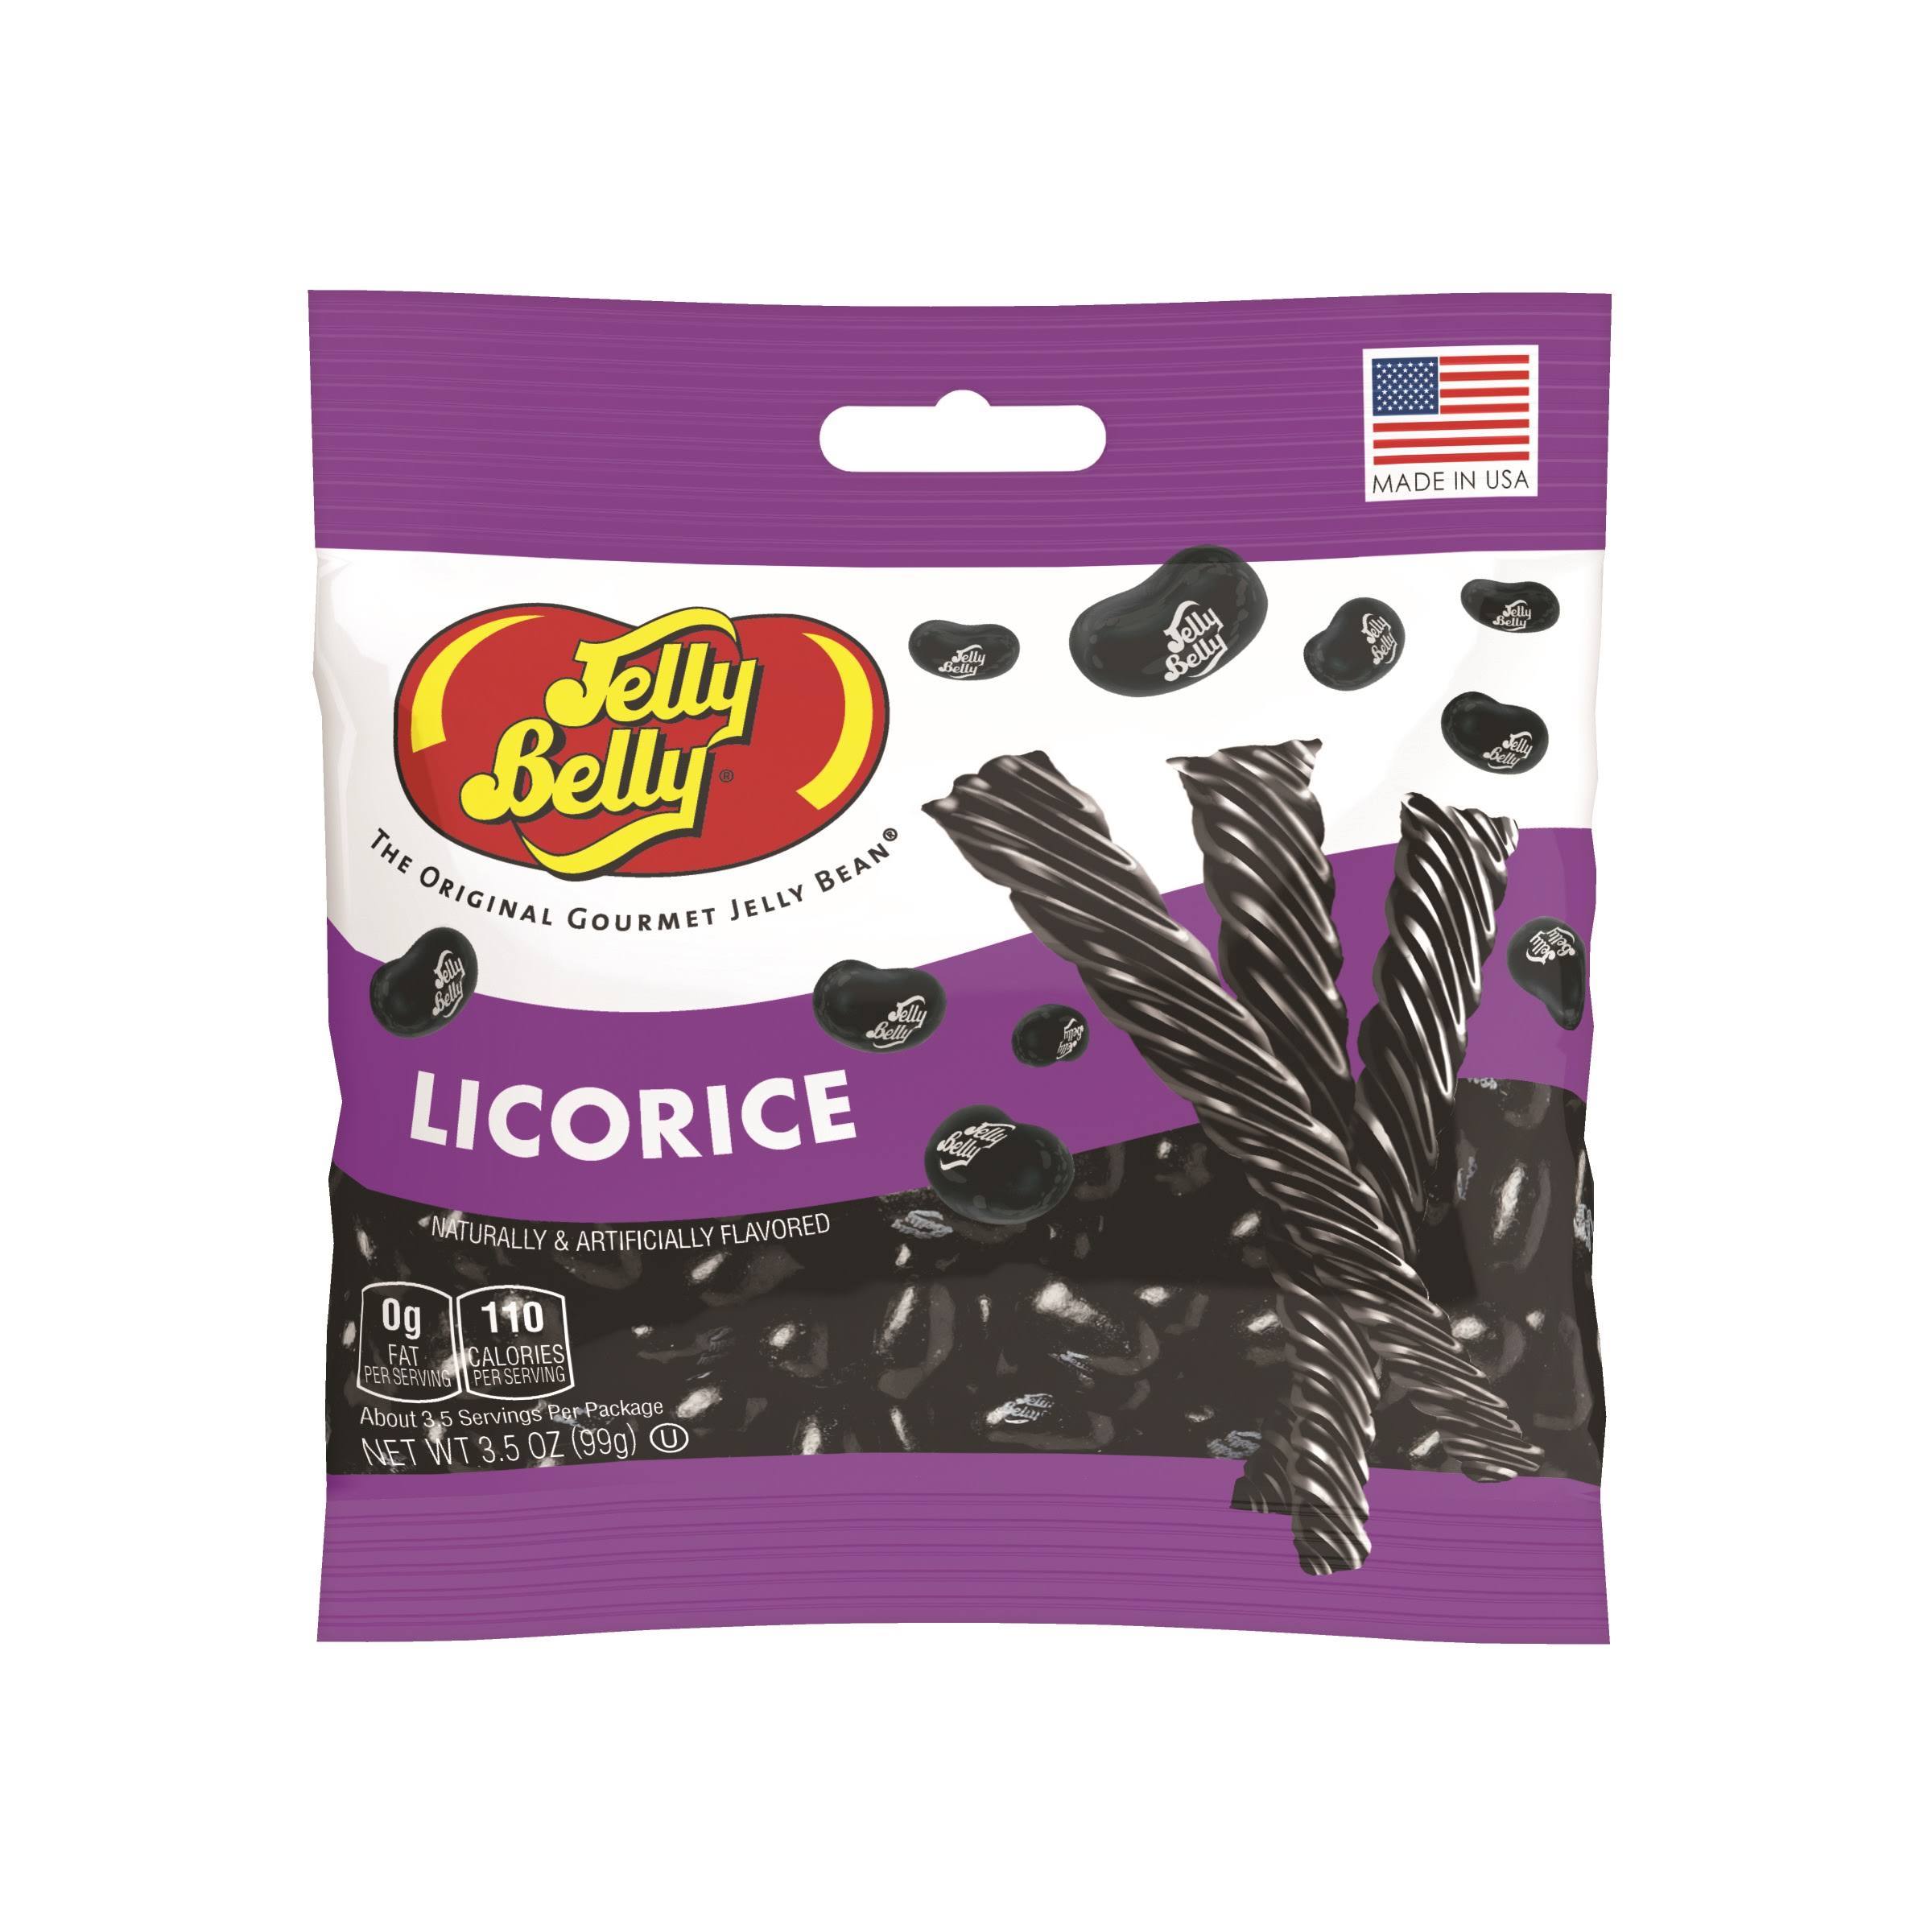 Jelly Belly Licorice Beans Candy - 3.5oz